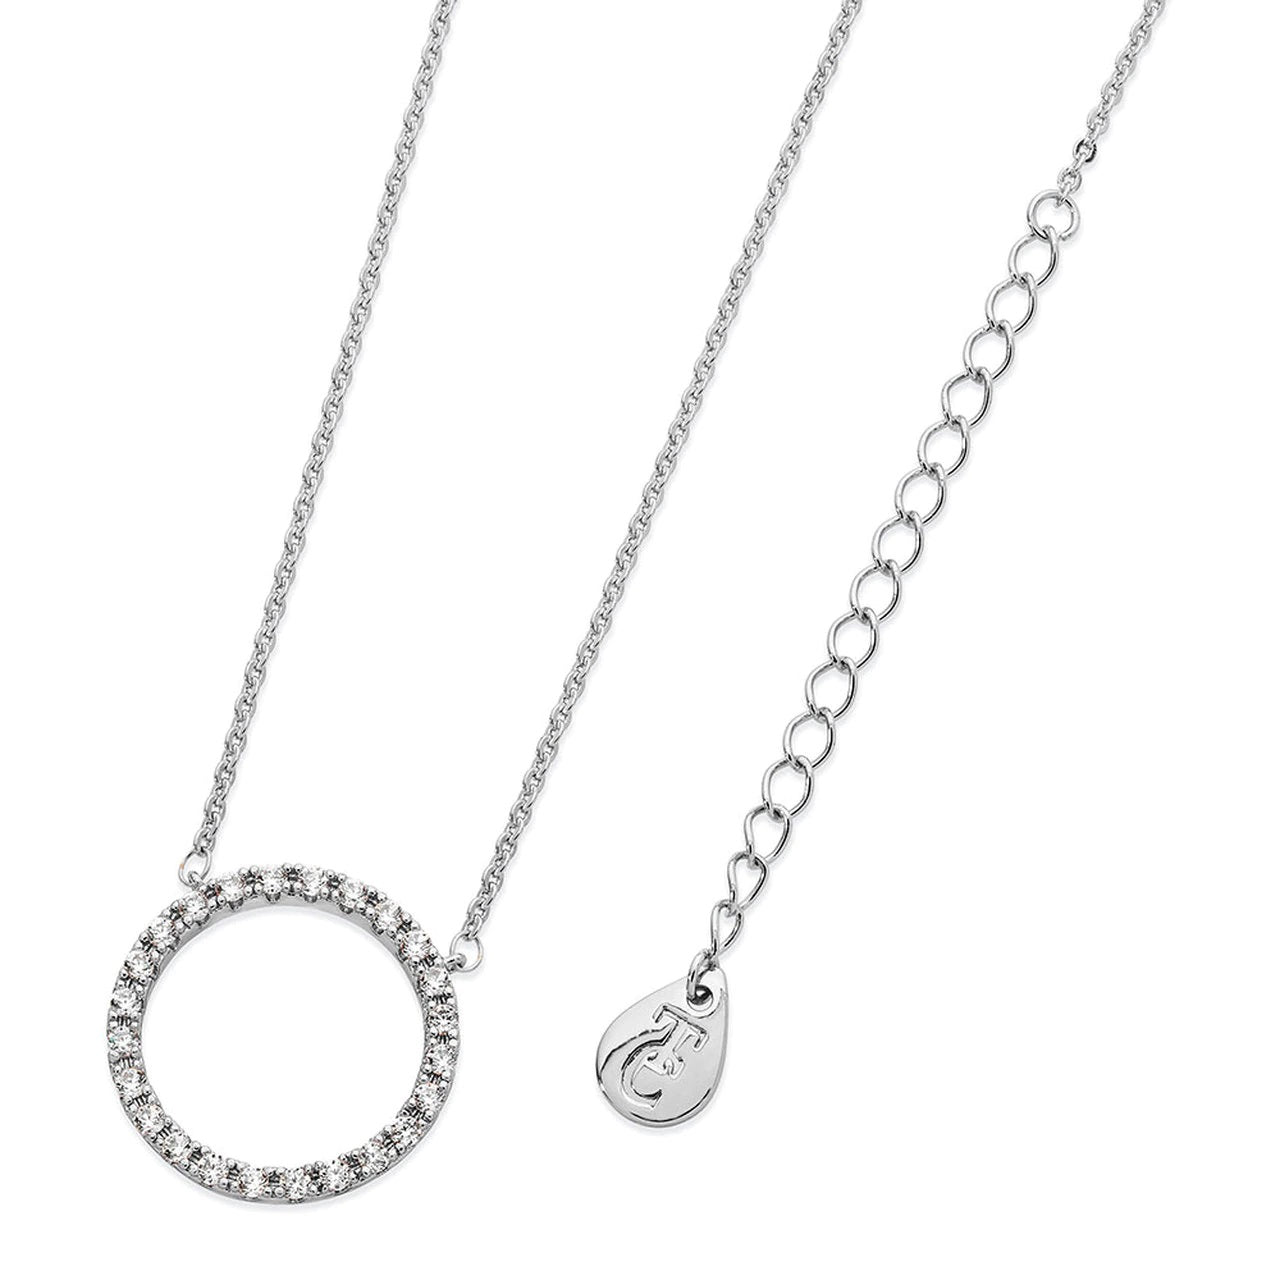 Forever Moon Pendant Silver - Tipperary Crystal  Symbolising your unending love, this simple diamond pendant is an unending circle of elegance. The dainty open circled design is completely lined in shimmering clear crystals and suspends along a silver cable chain that secures with a lobster claw clasp, a chain extension and a TC branded fob.